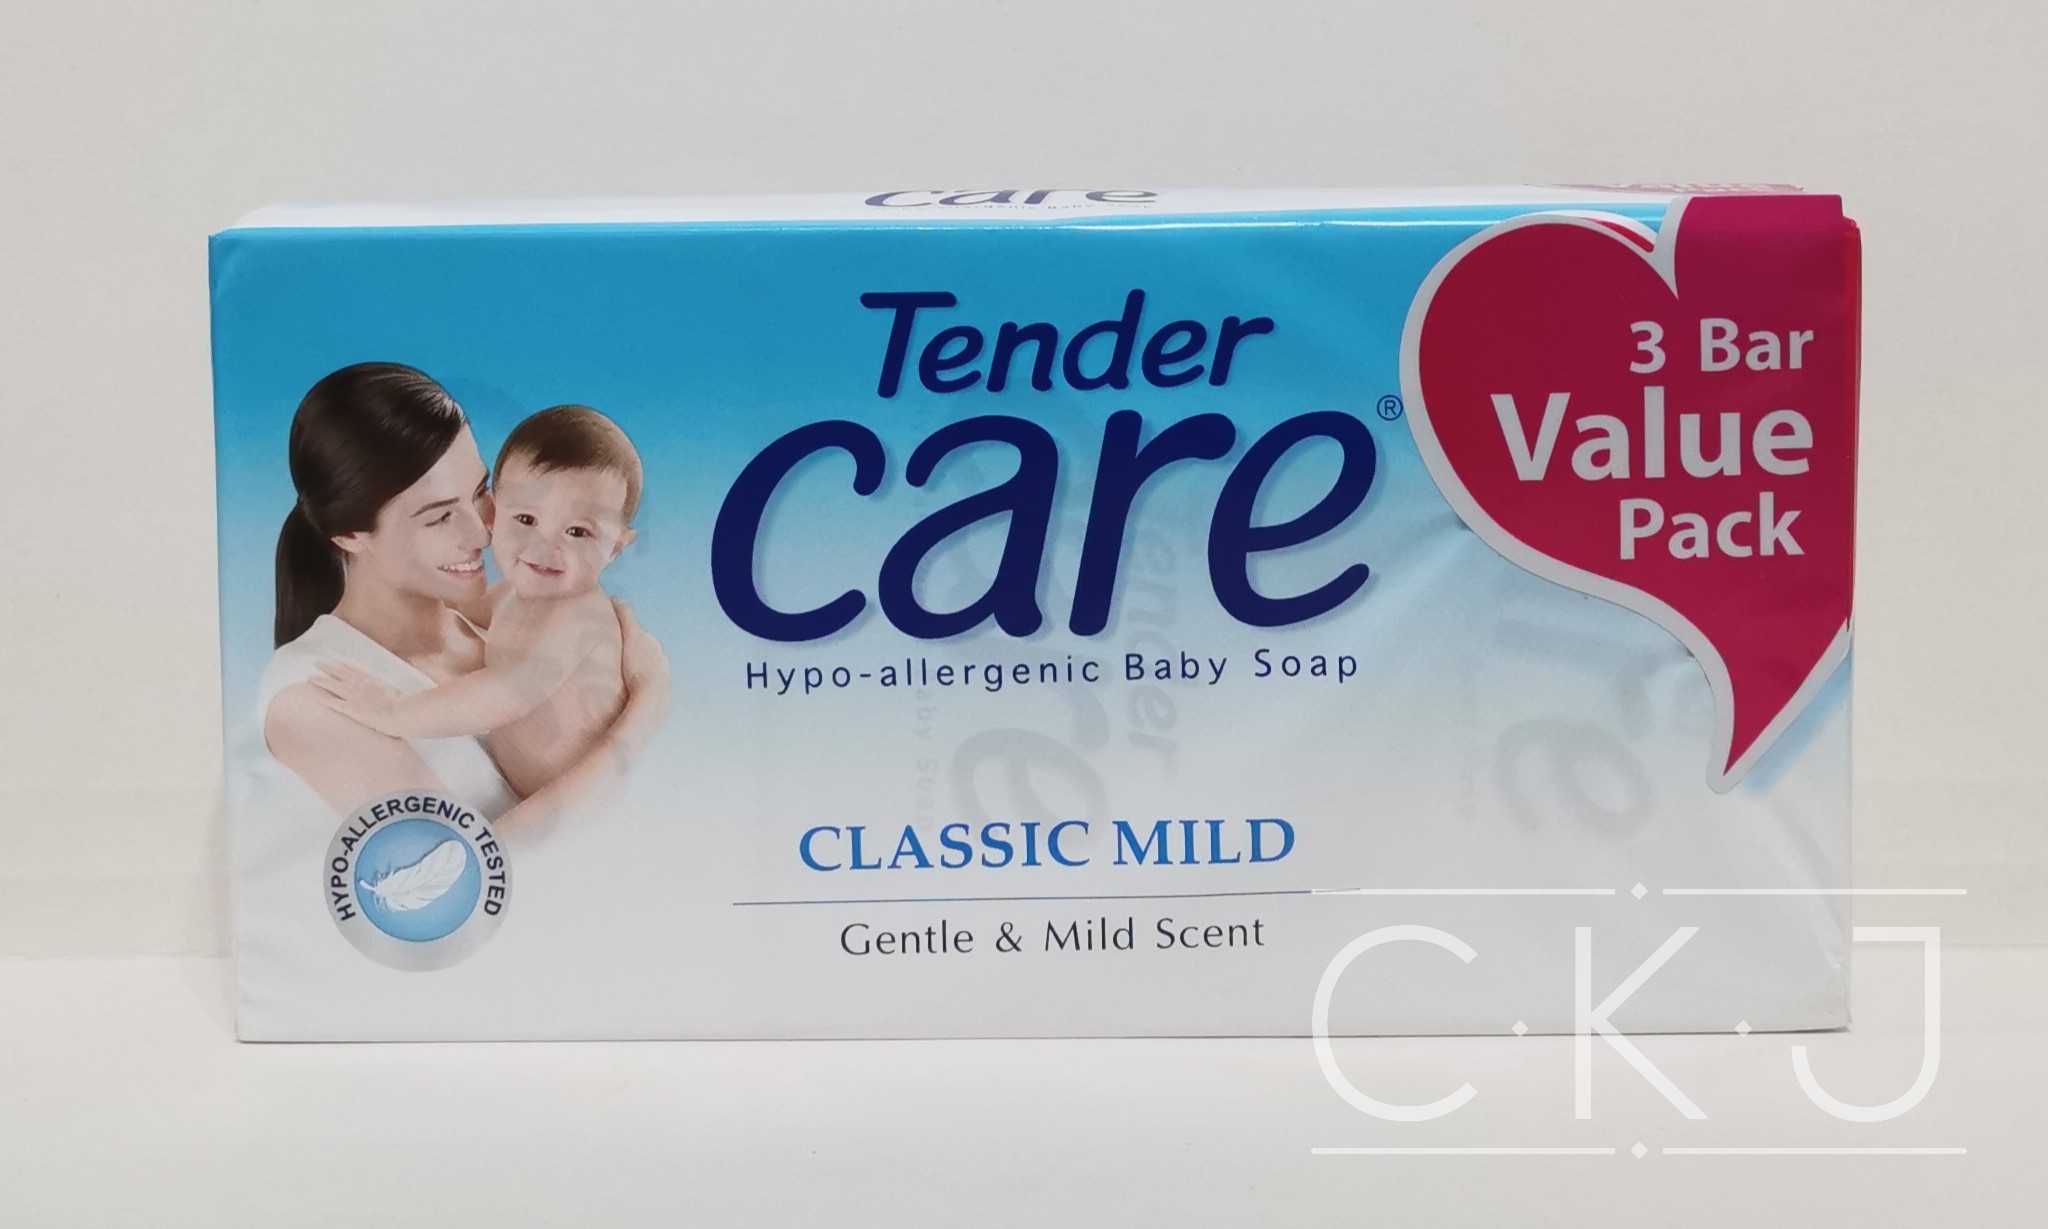 Tender Care Baby Soap Classic Mild 55g